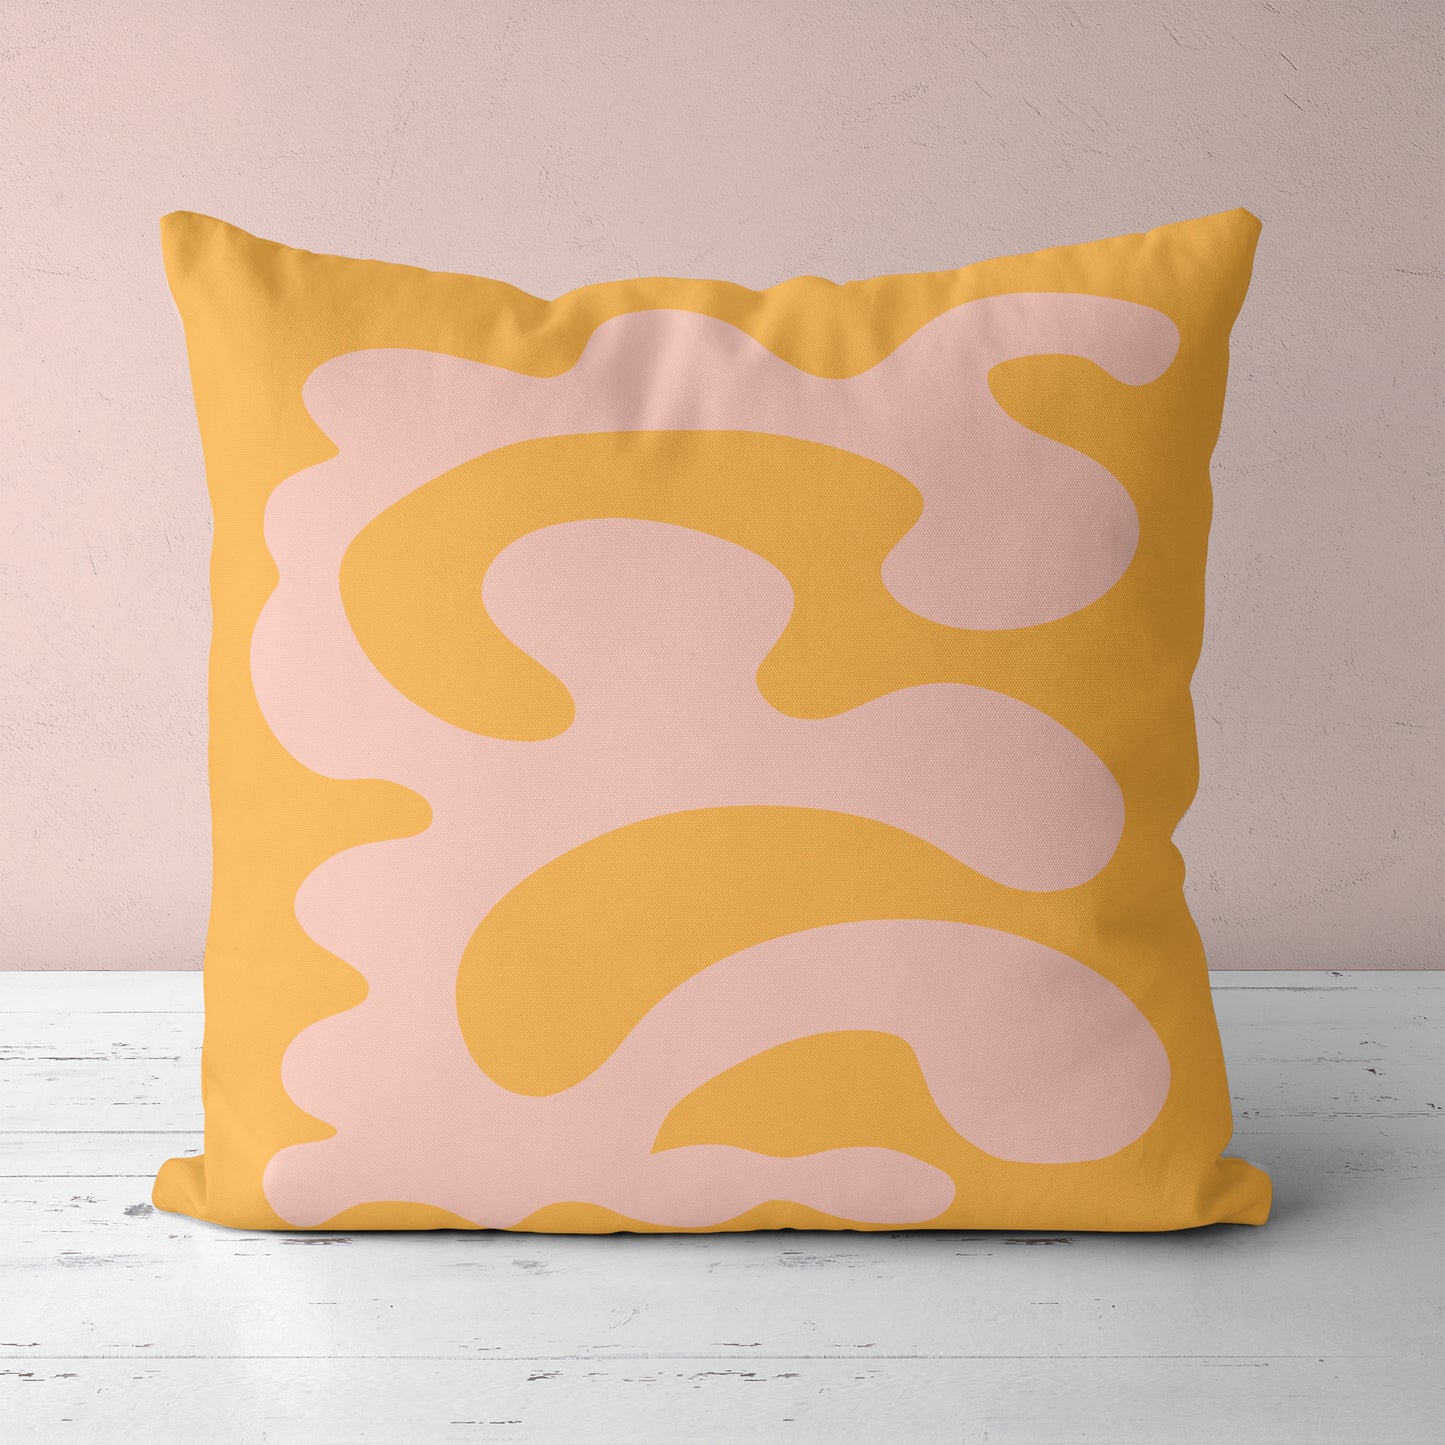 Yellow Throw Pillow with Abstract Shapes